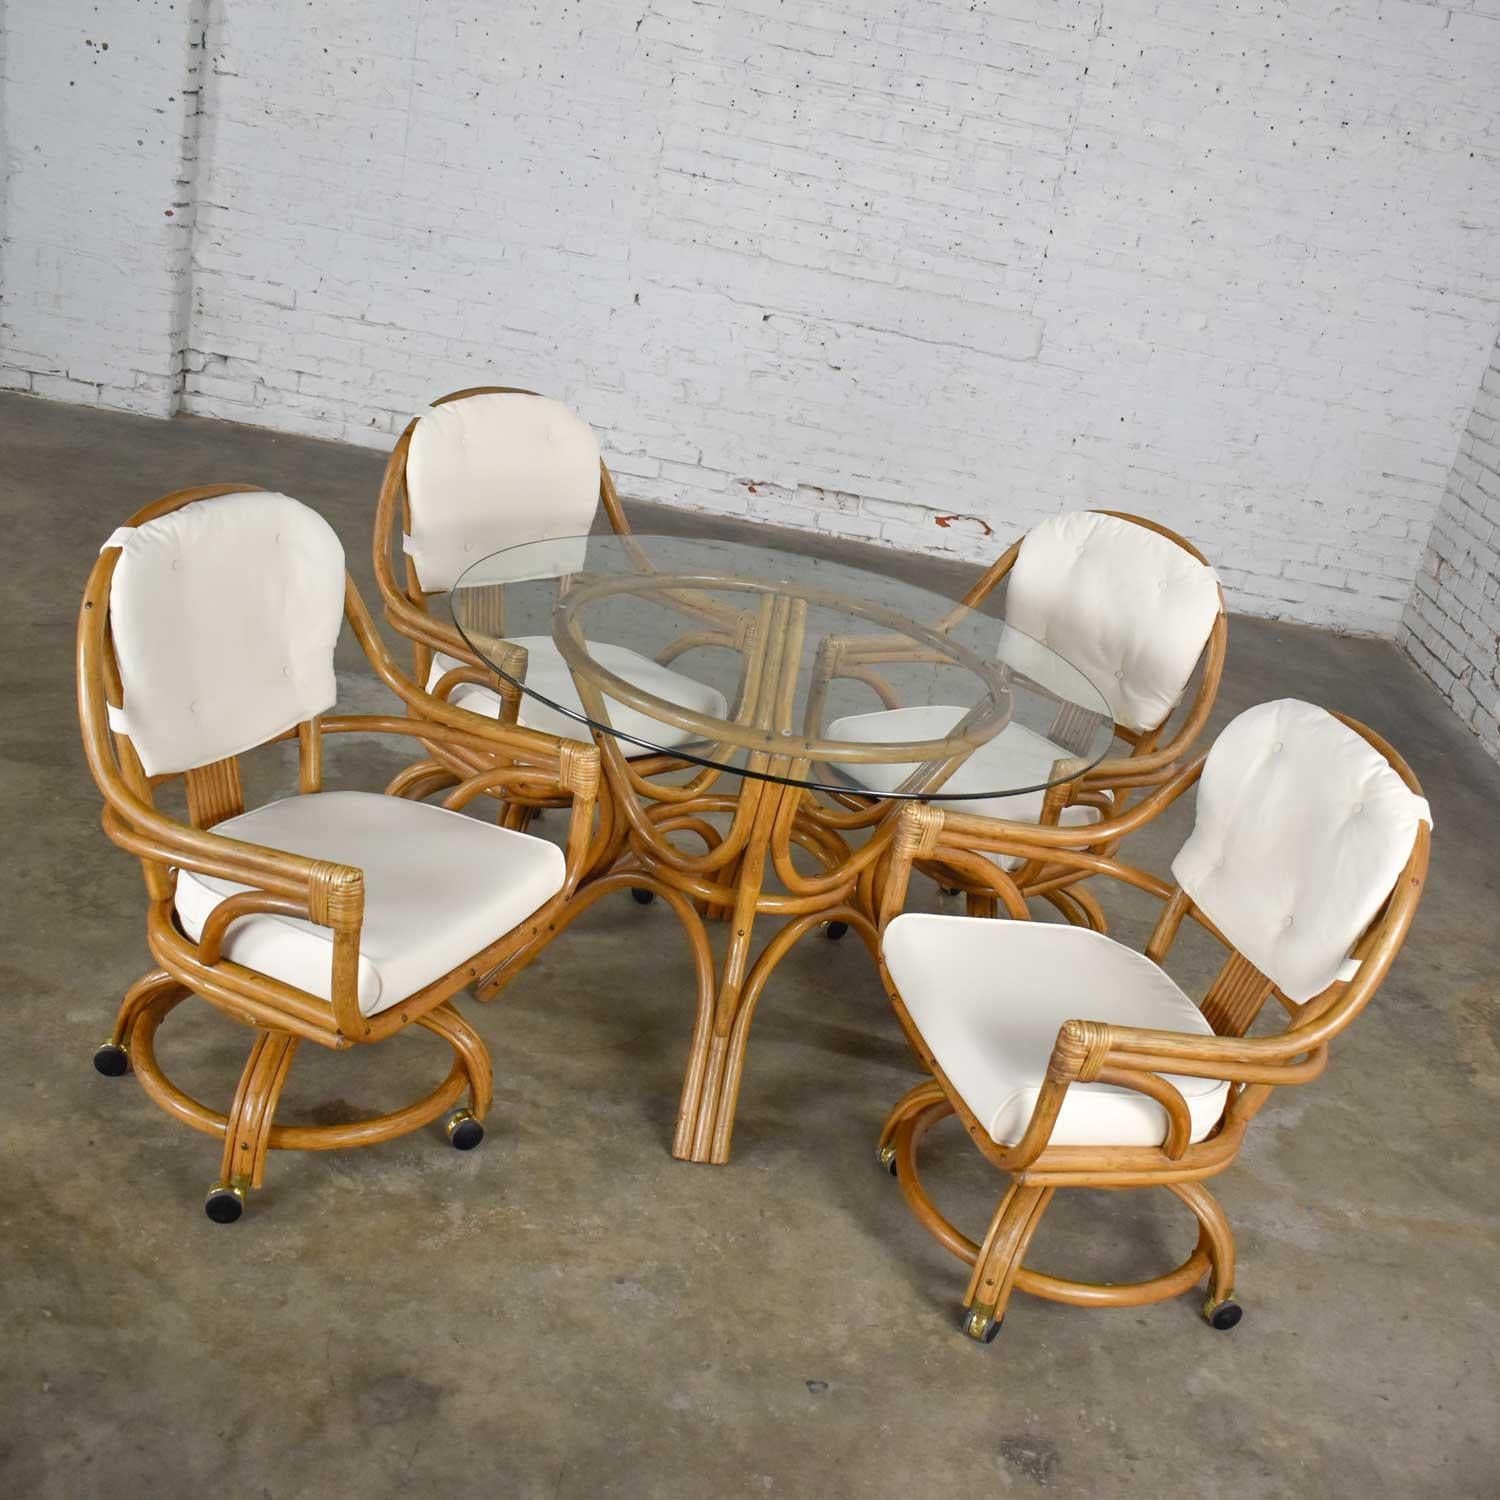 Beautiful game table or dining table set by Pacific Rattan of California including a round glass top rattan base table and four (4) swivel rolling rattan chairs with new off-white canvas zippered upholstery and removable seat and back cushions.